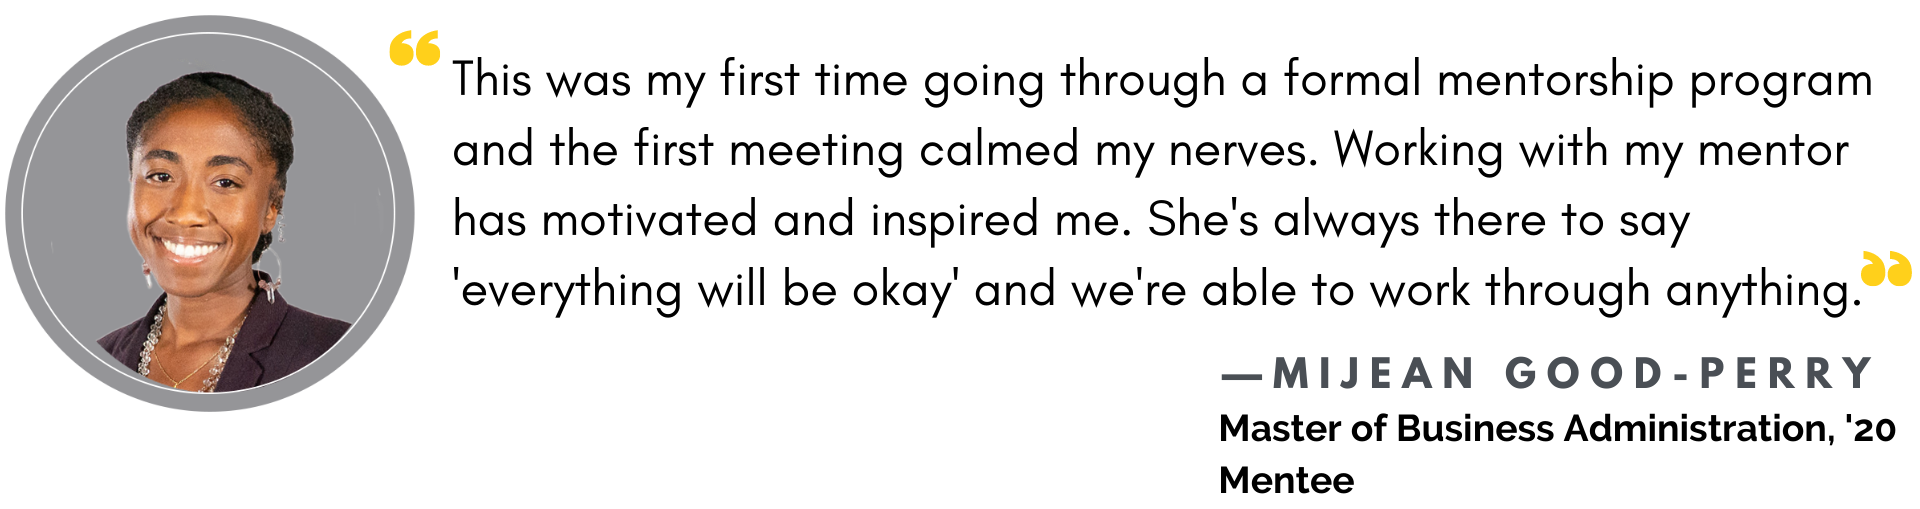 This was my first time going through a formal mentorship program and the first meeting calmed my my nerves. Working with my mentor has motivated and inspired me. She's always there to say 'everything will be okay' and we're able to work through anything."